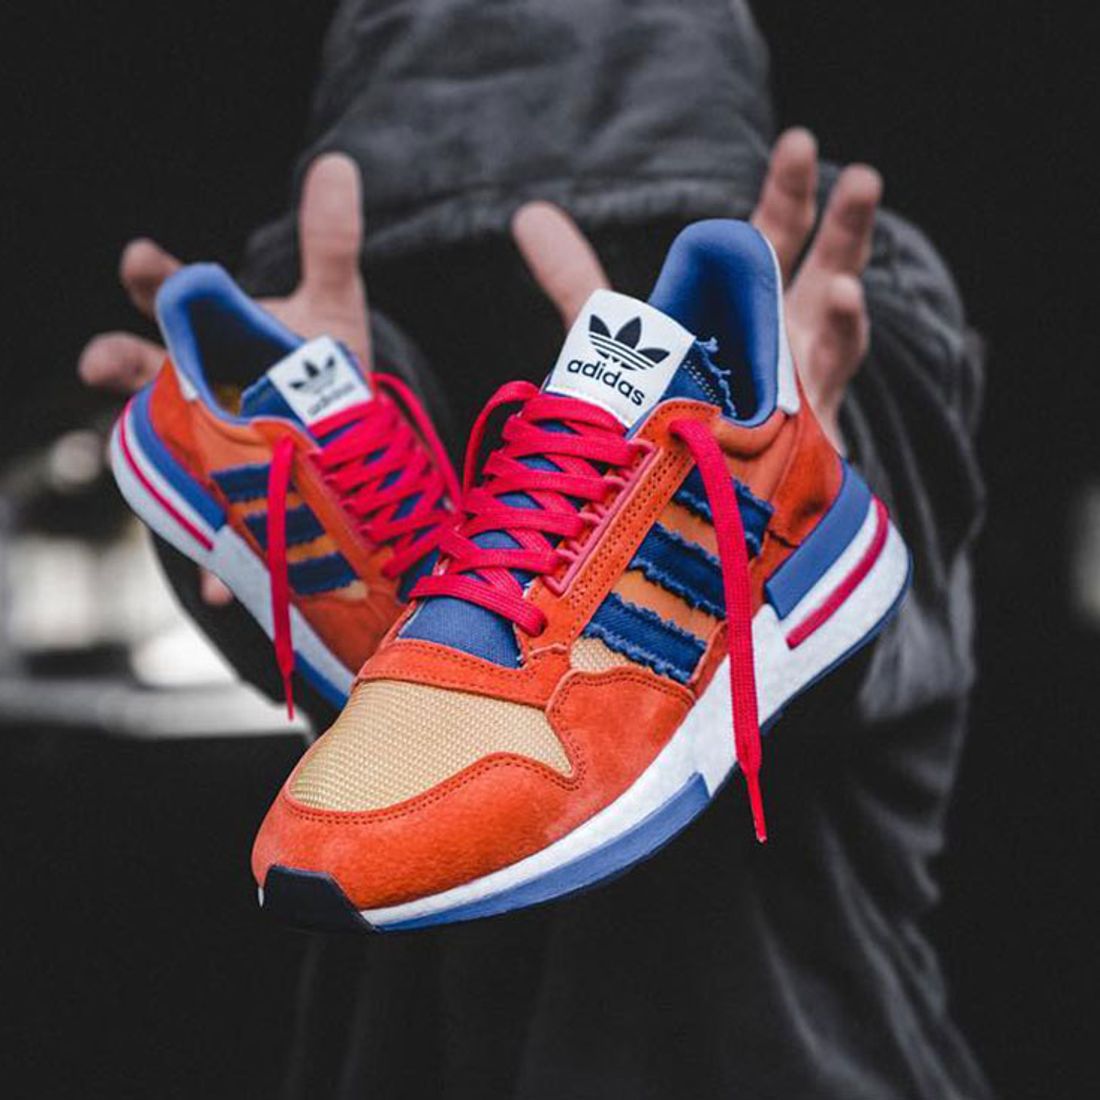 How People Are Styling the Dragon Ball Z x adidas 'Goku' and - Sneaker Freaker